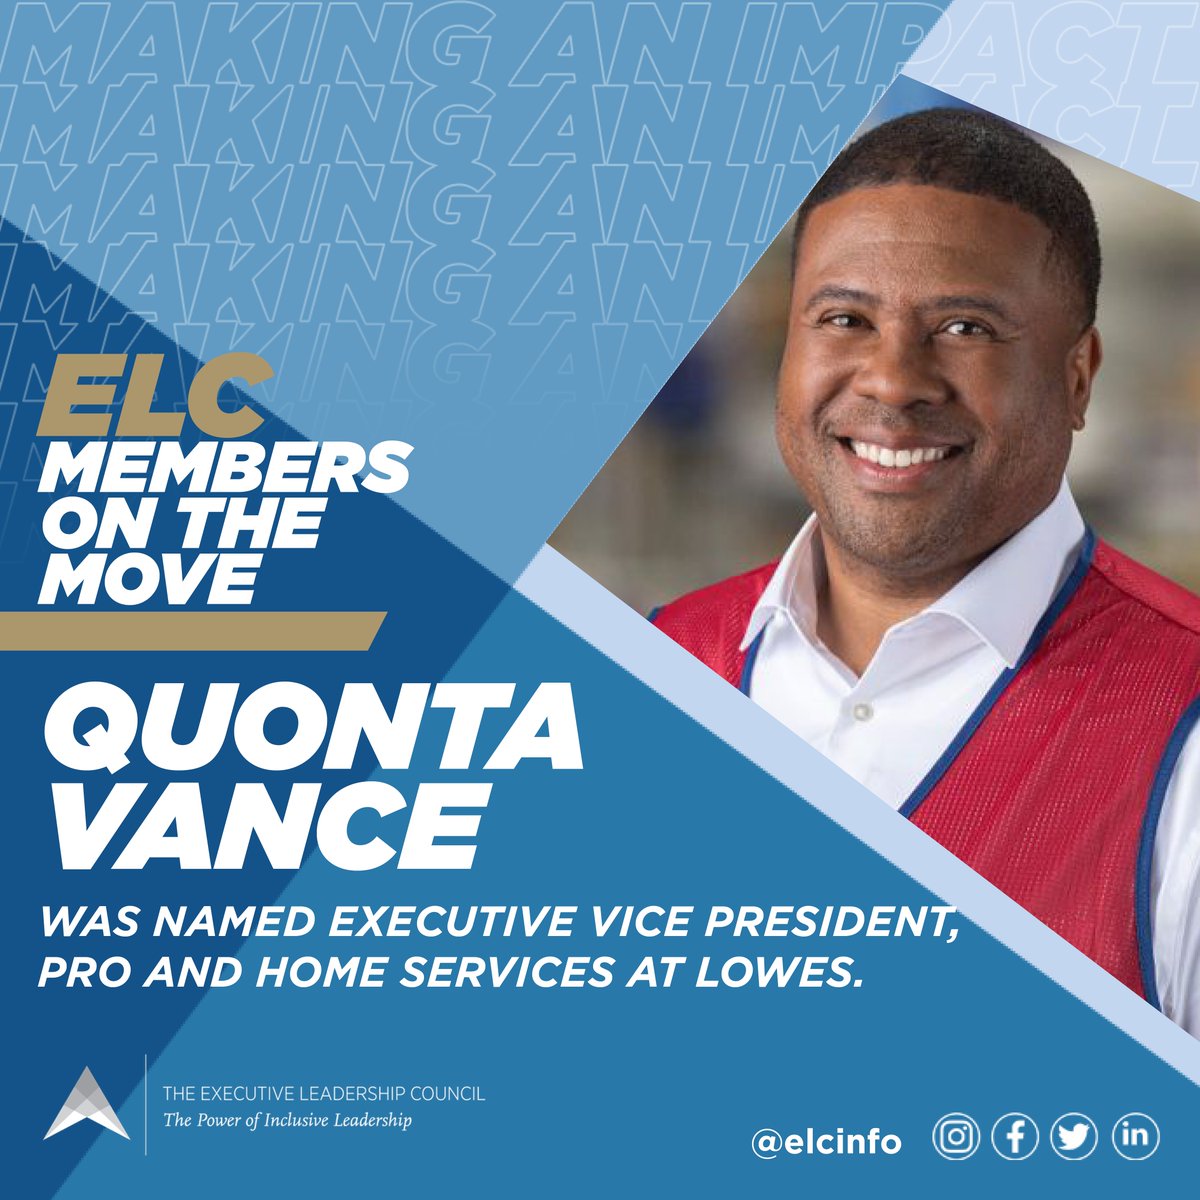 Congratulations to #ELCMember Quonta Vance, who was named Executive Vice President, Pro and Home Services at @Lowes. #ELCMembersOnTheMove #BlackMenLead #BlackExecutives #BlackLeadership